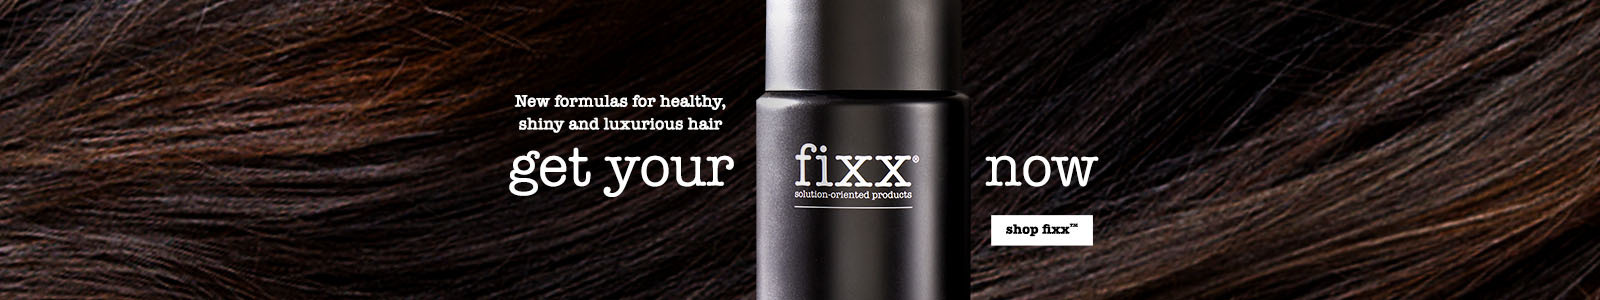 New formulas for healthy, shiny and luxurious har get your fixx now Shop fixx